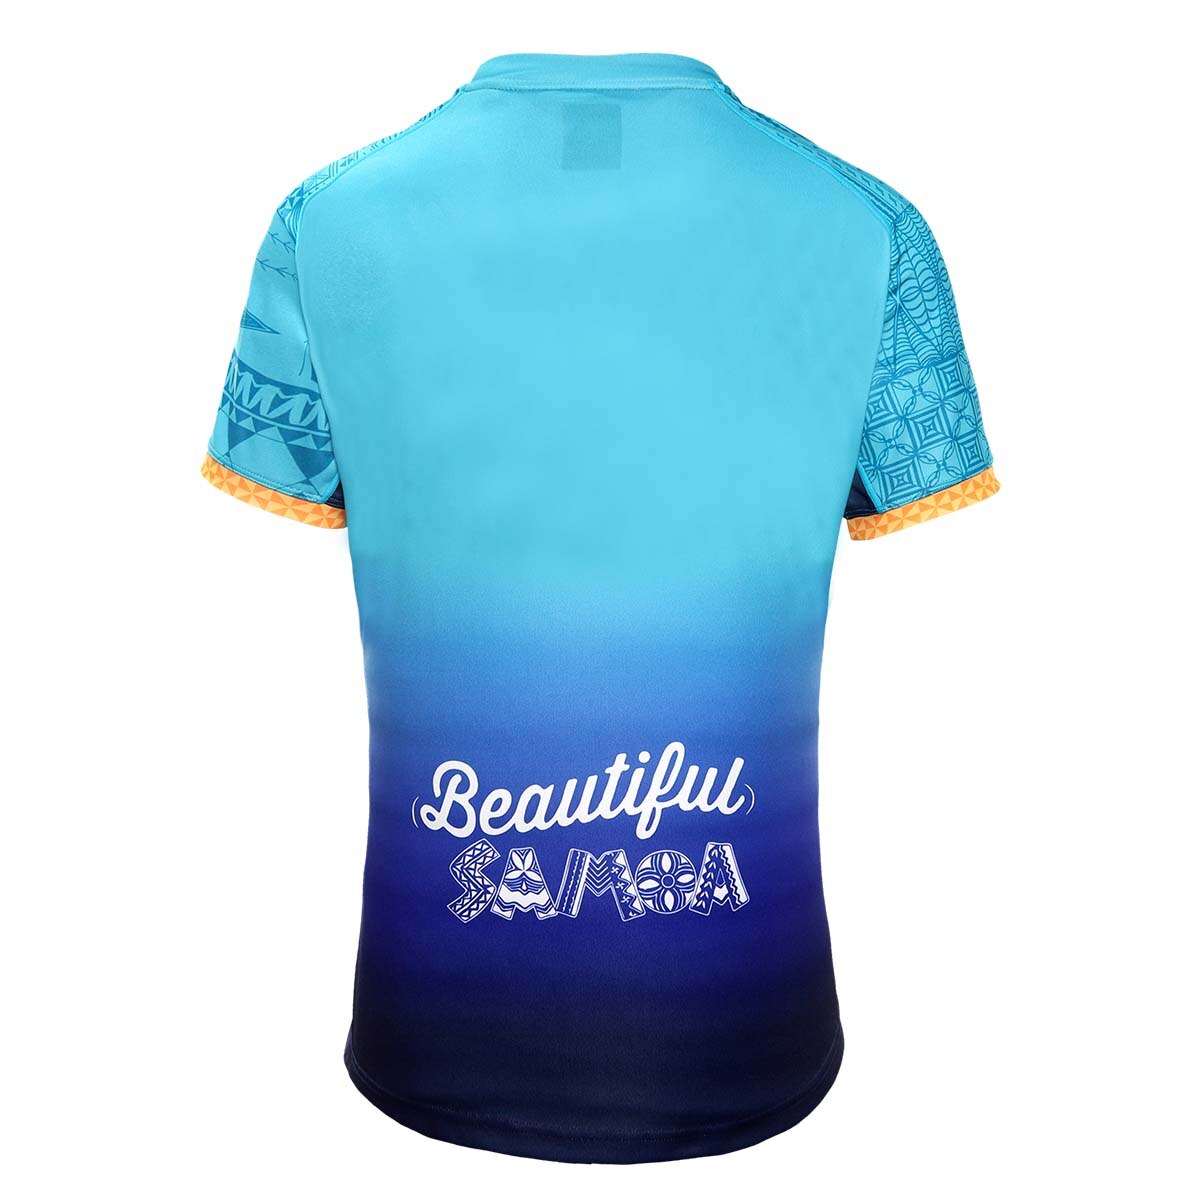 New Men's Moana Pacifica Home Rugby Jersey, Shirt